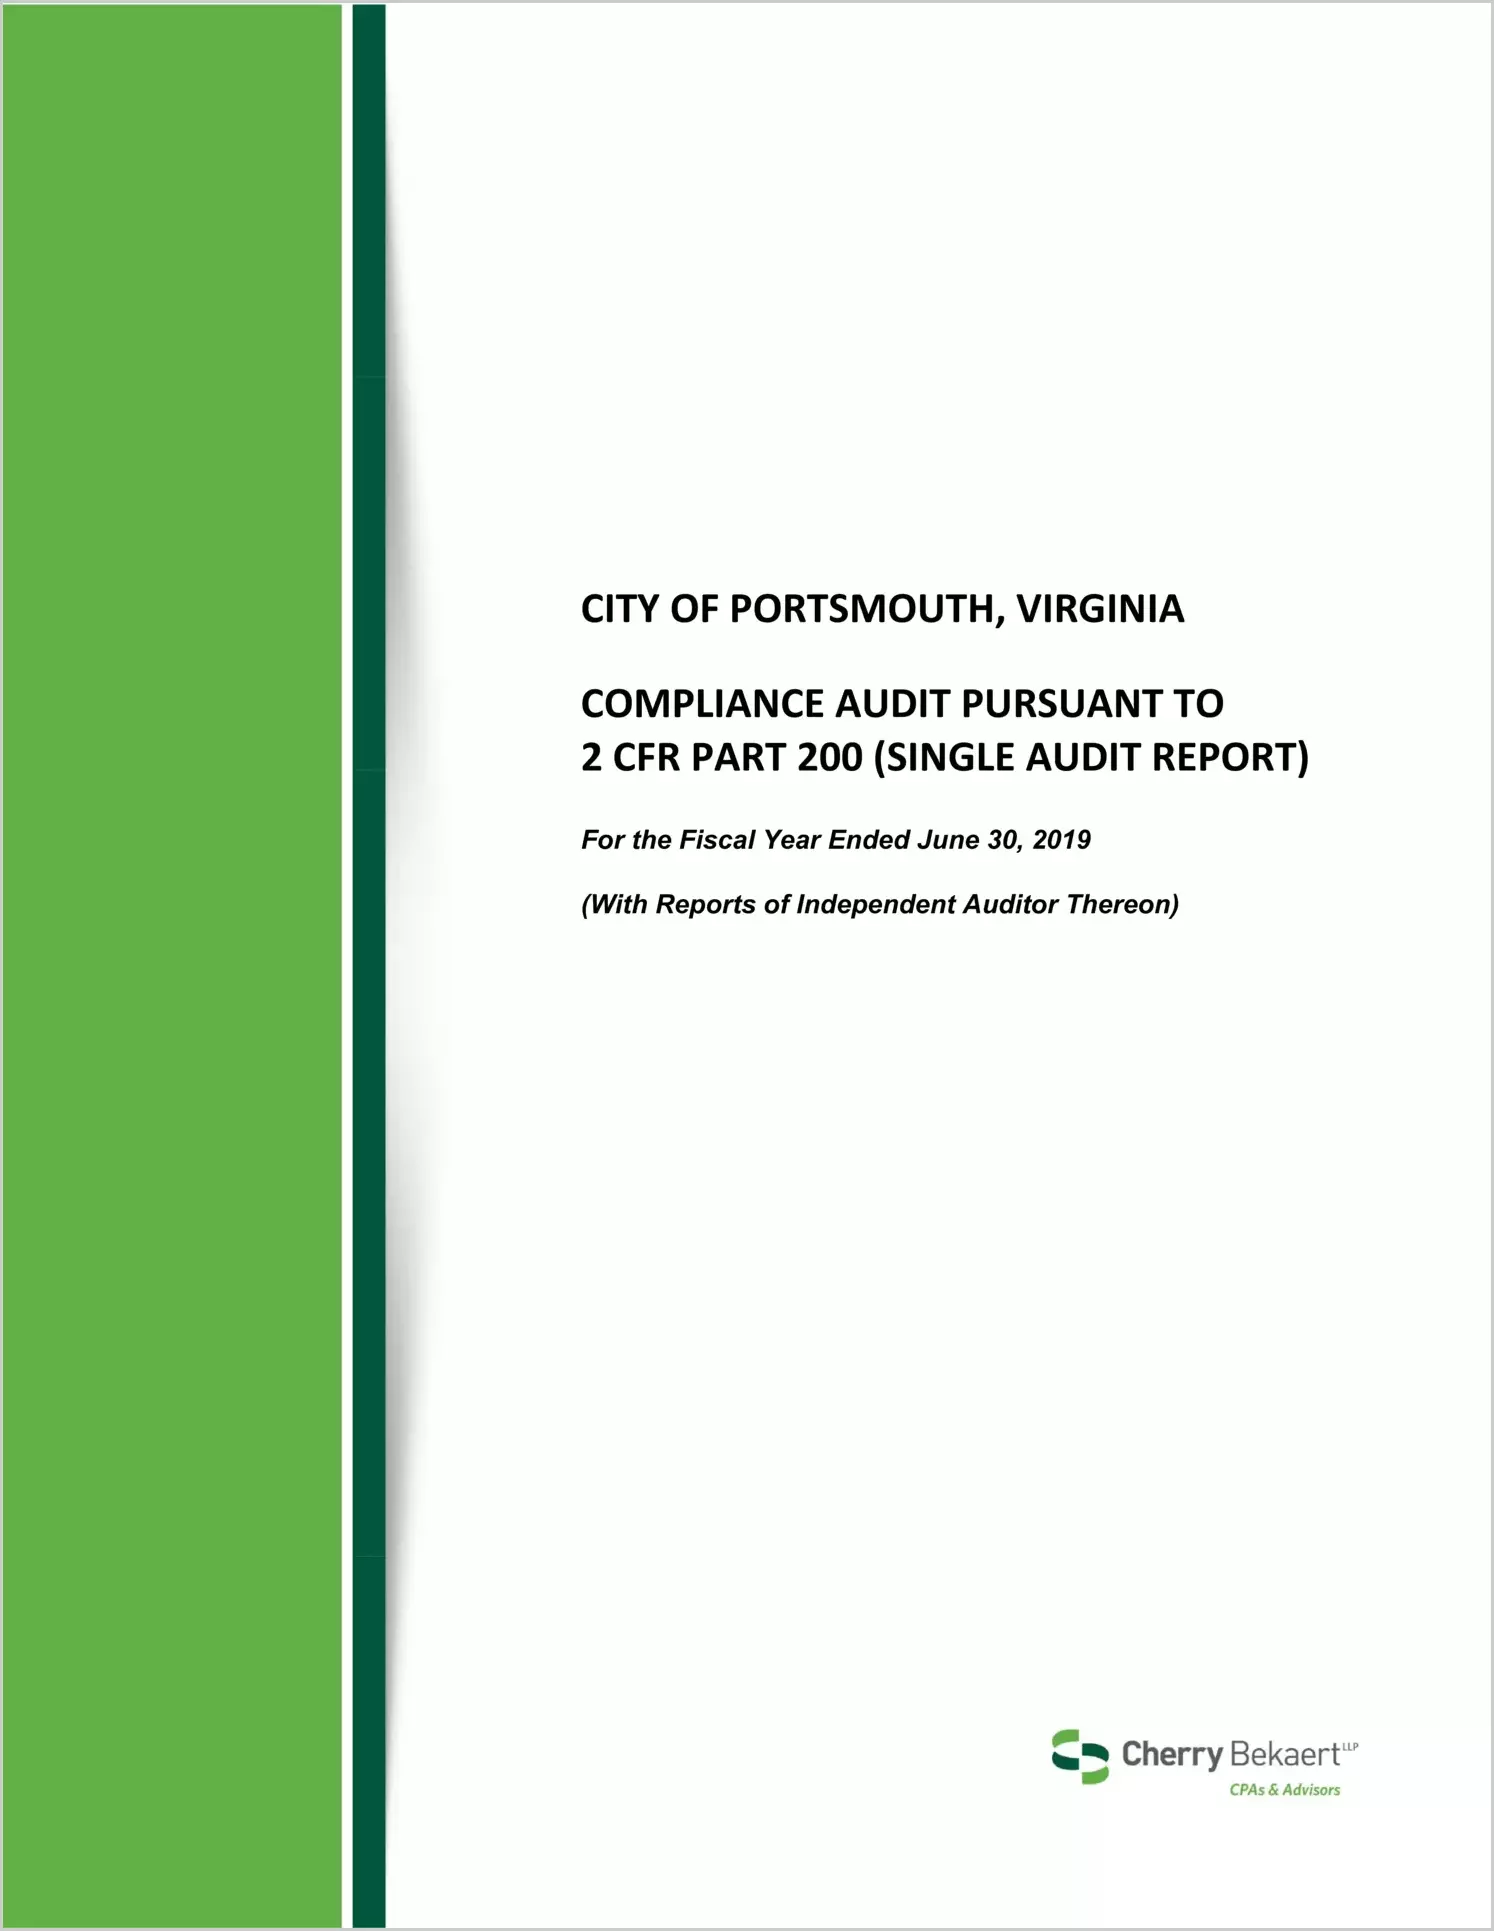 2019 Internal Control and Compliance Report for City of Portsmouth